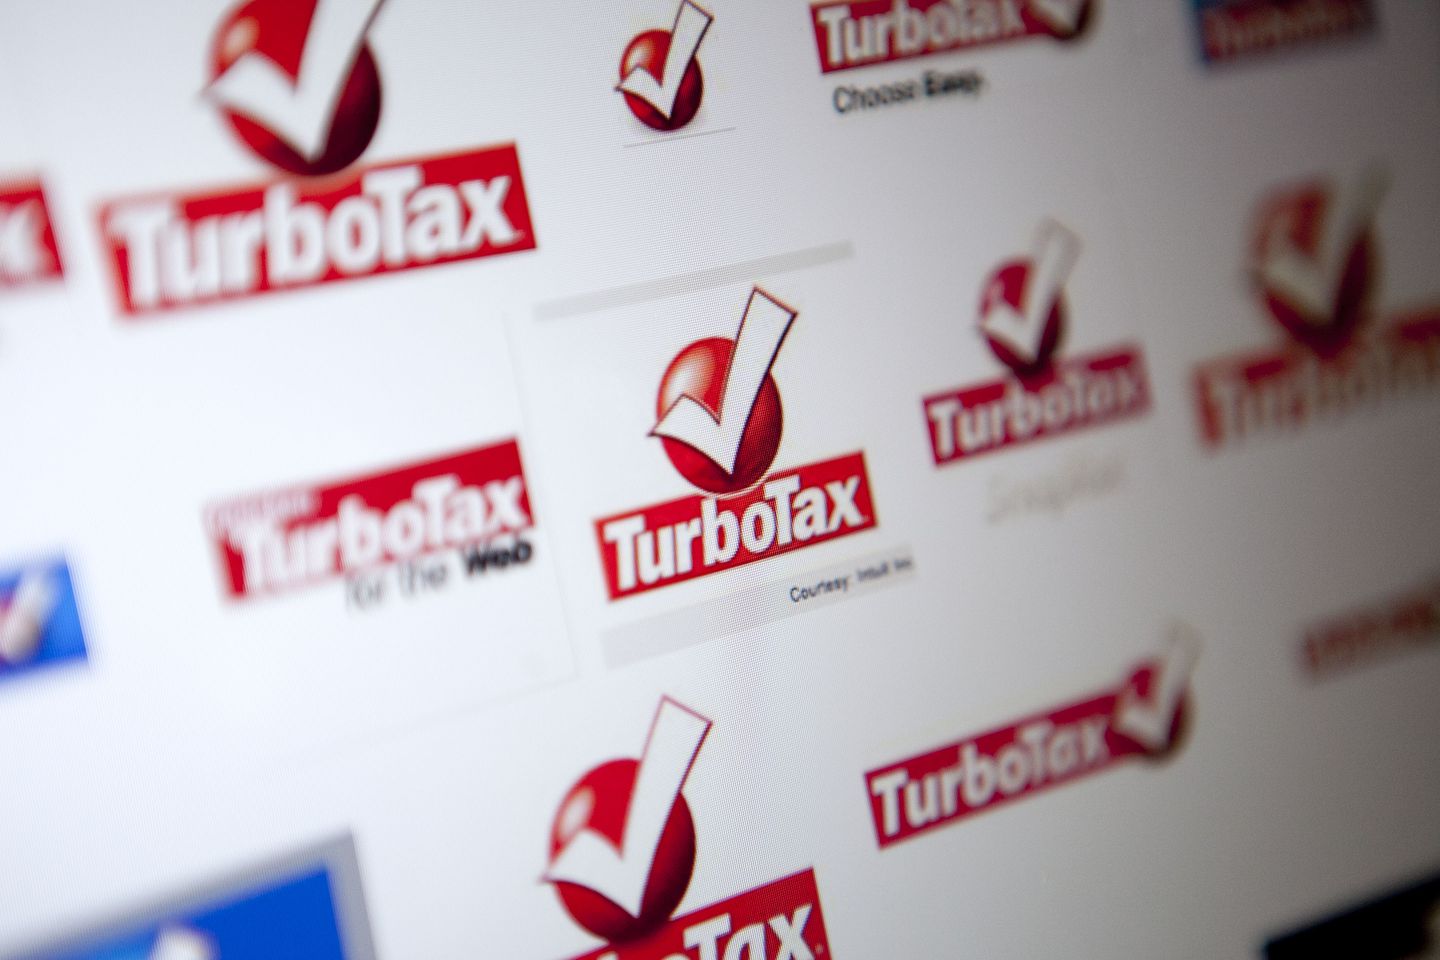 TurboTax parent company Intuit is exiting the IRS Free File Program